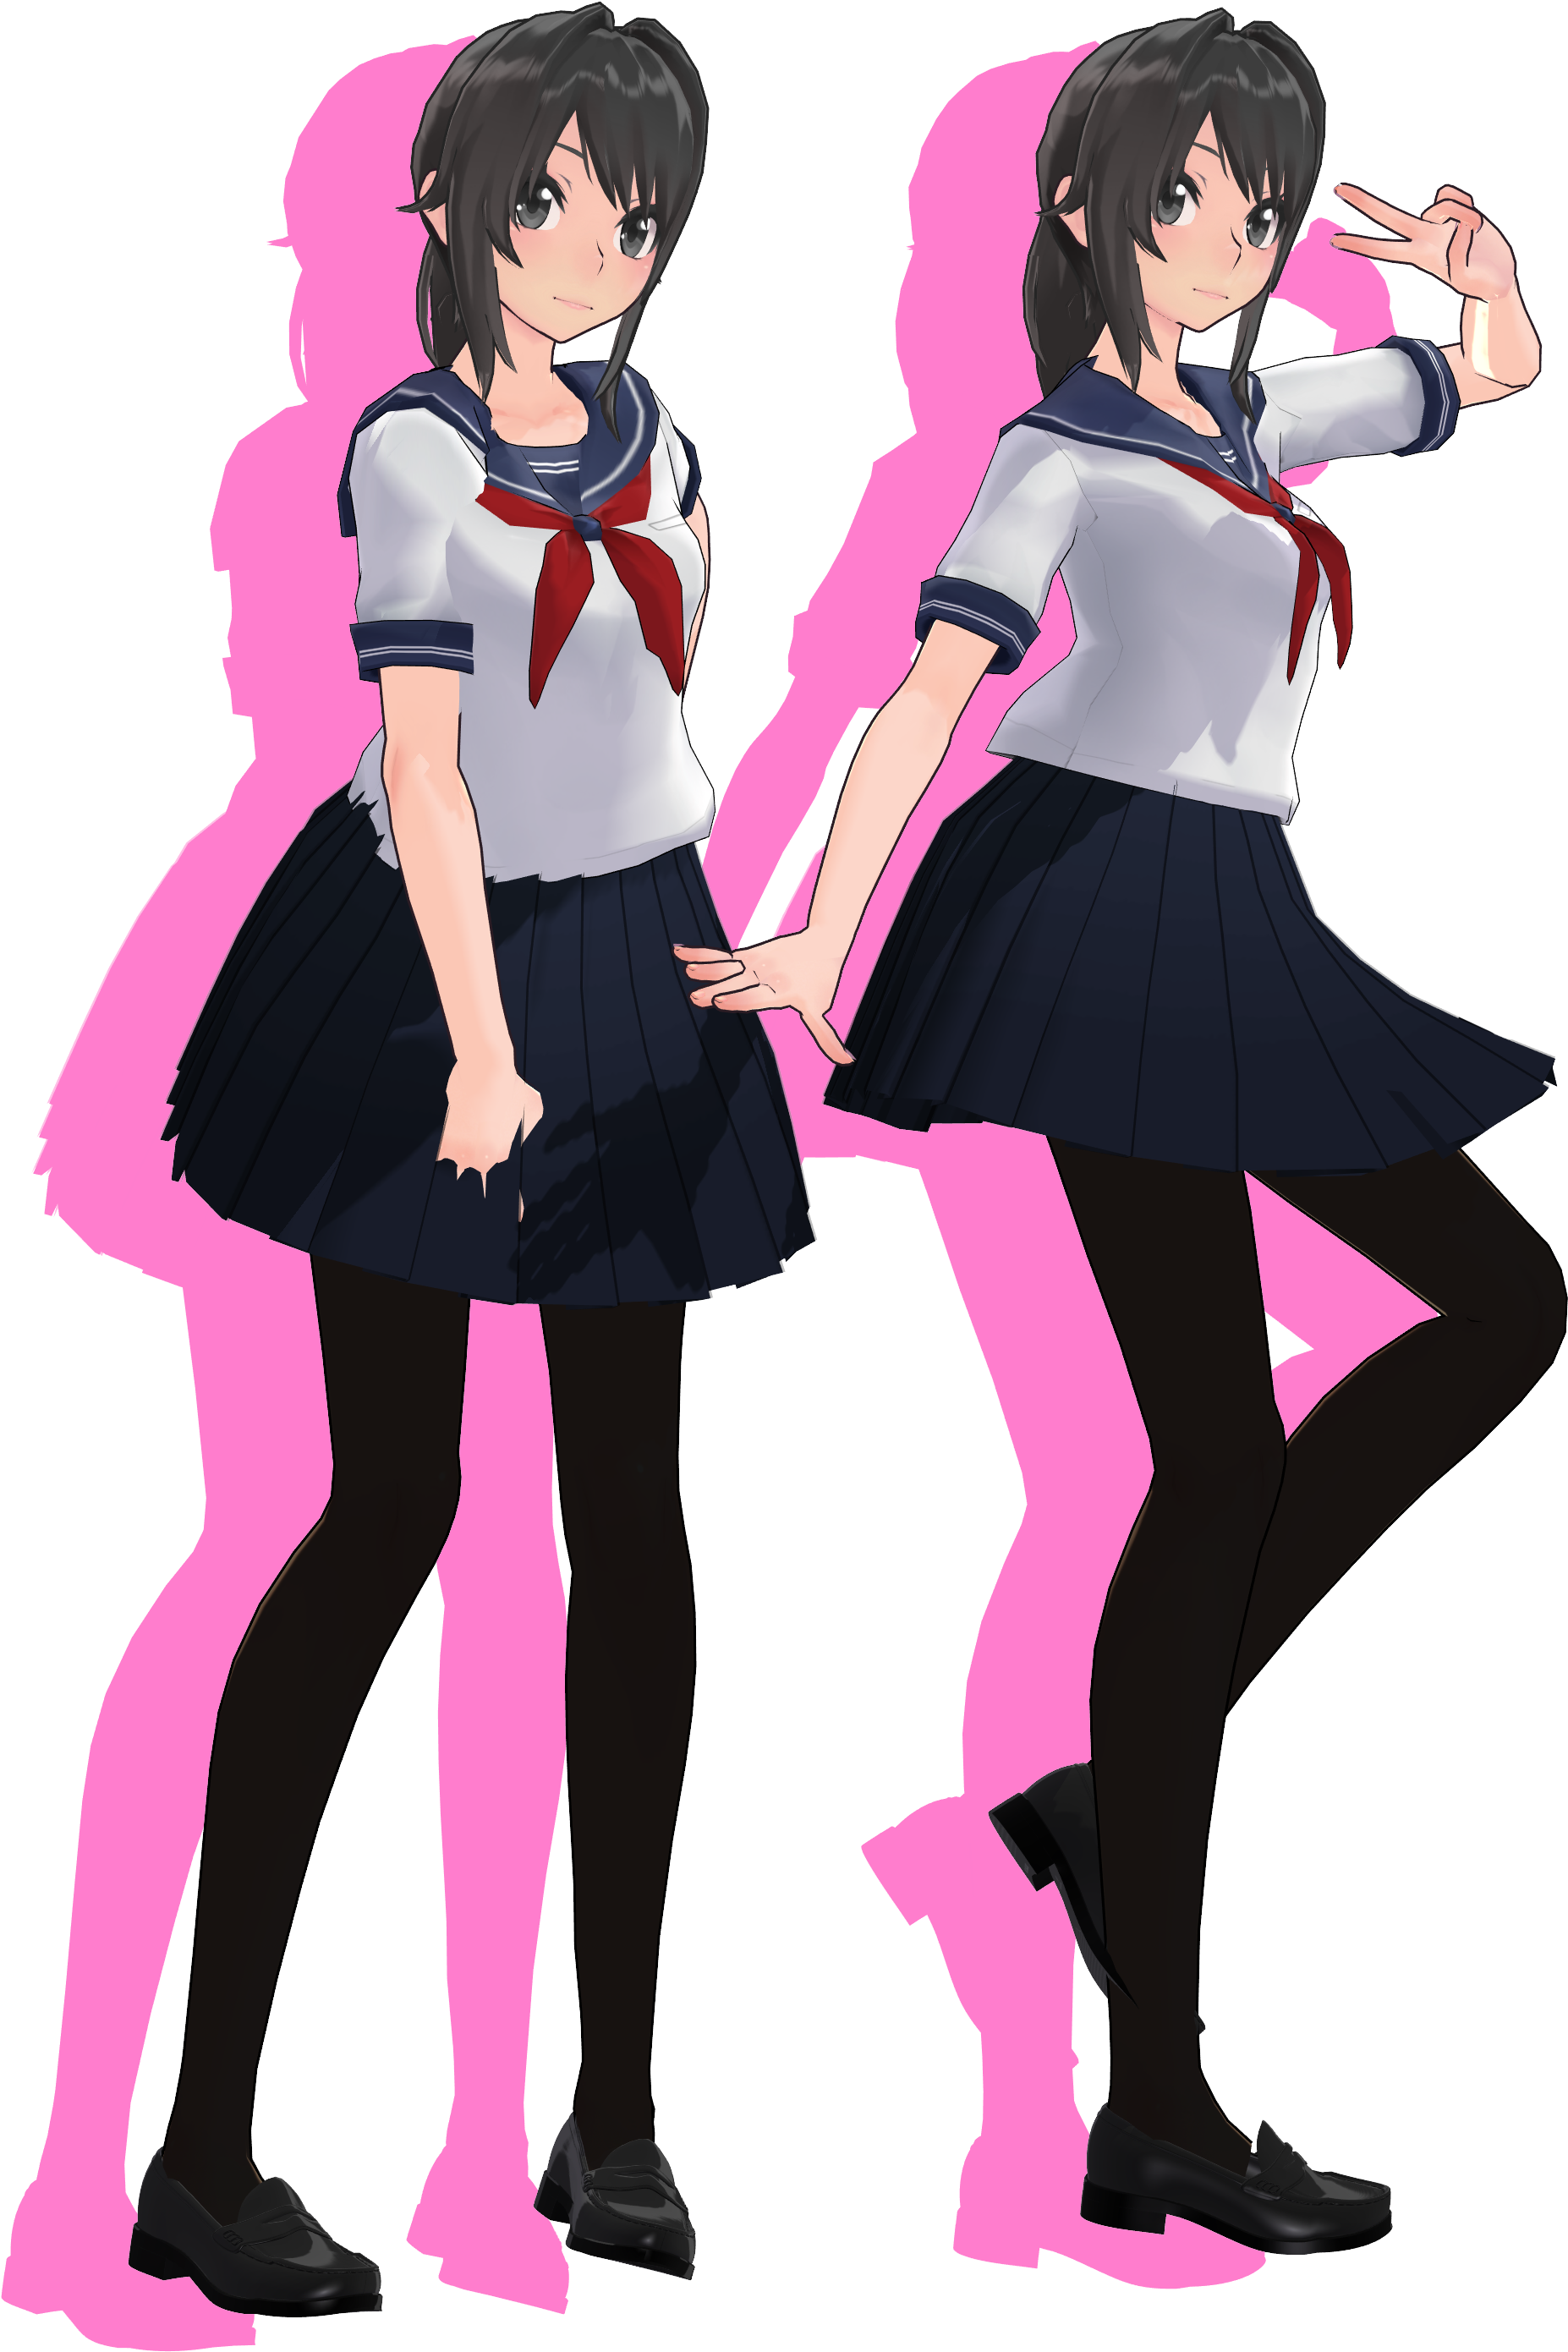 Imageshave You Thought About Using The Mmd Models Of - Mmd Models Yandere Simulator (2040x2850)